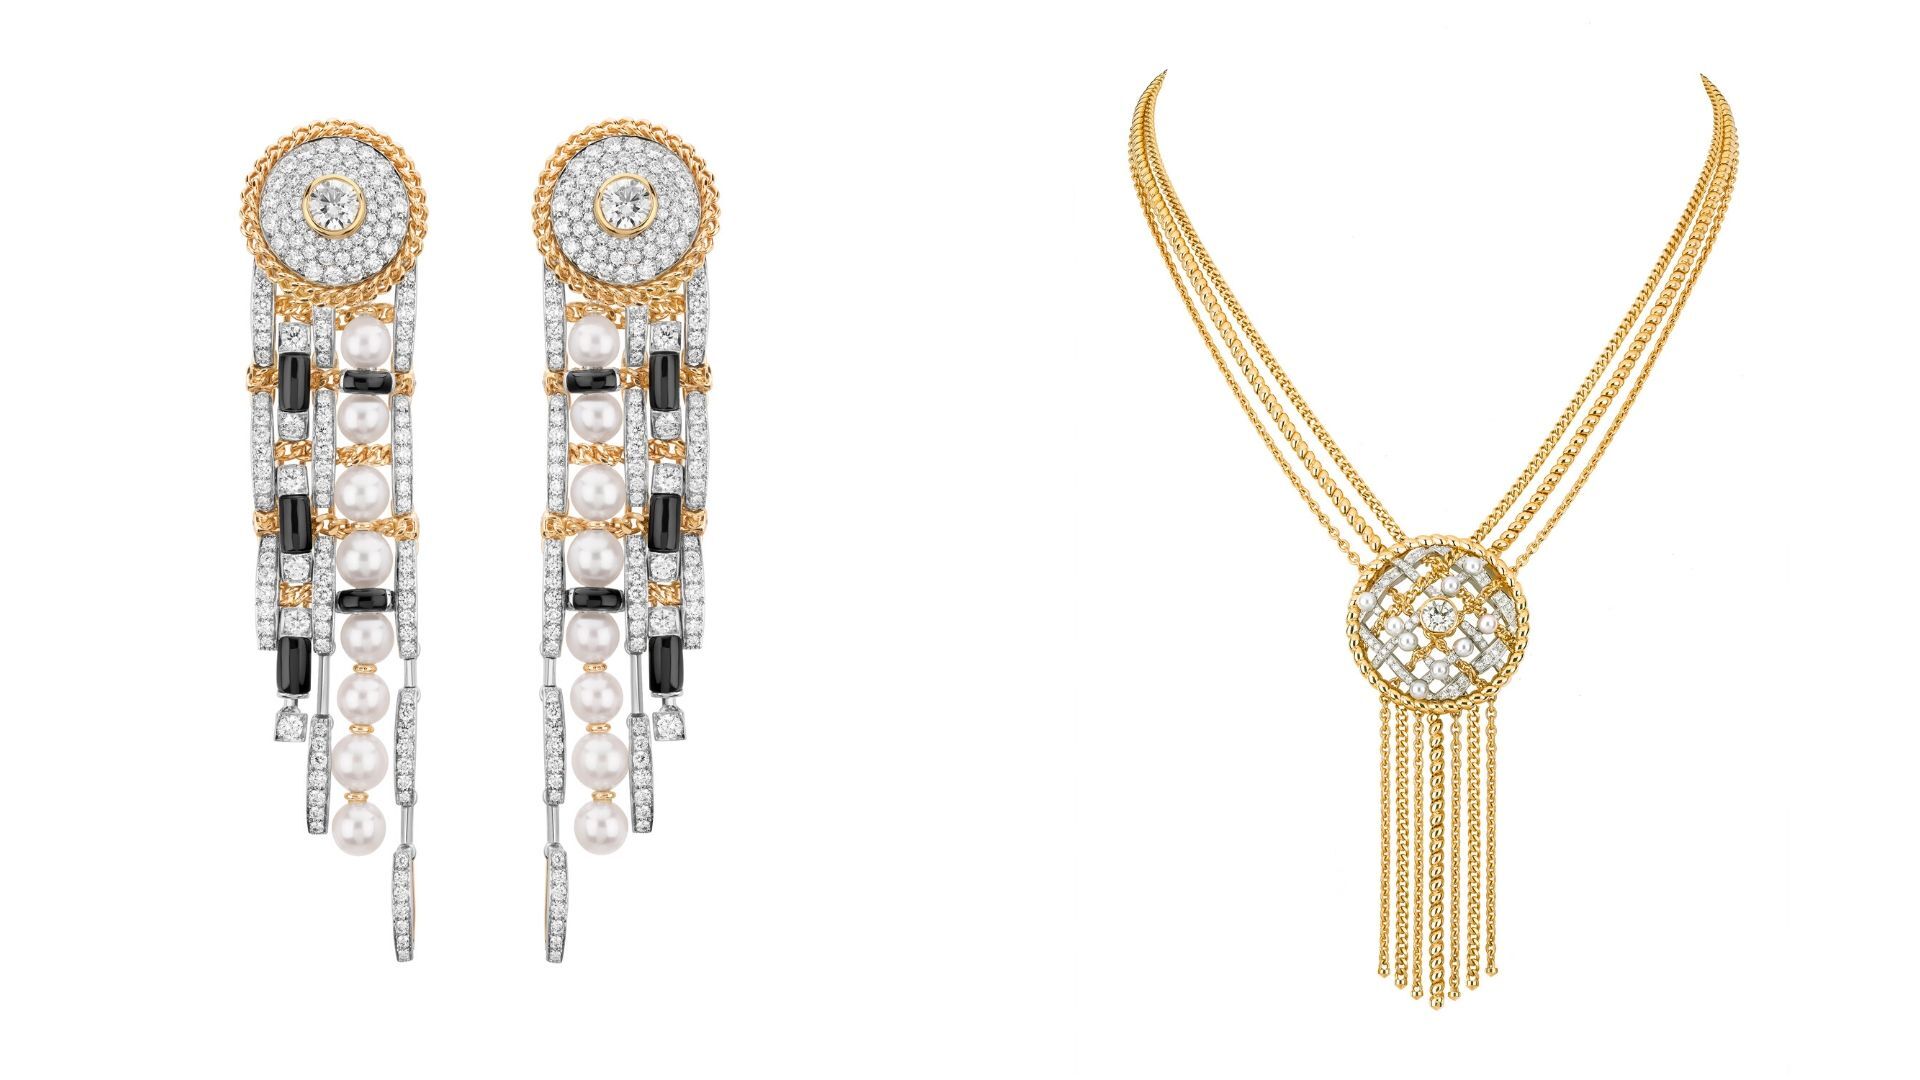 GALLERY: Chanel marks 90 years since first high jewellery collection